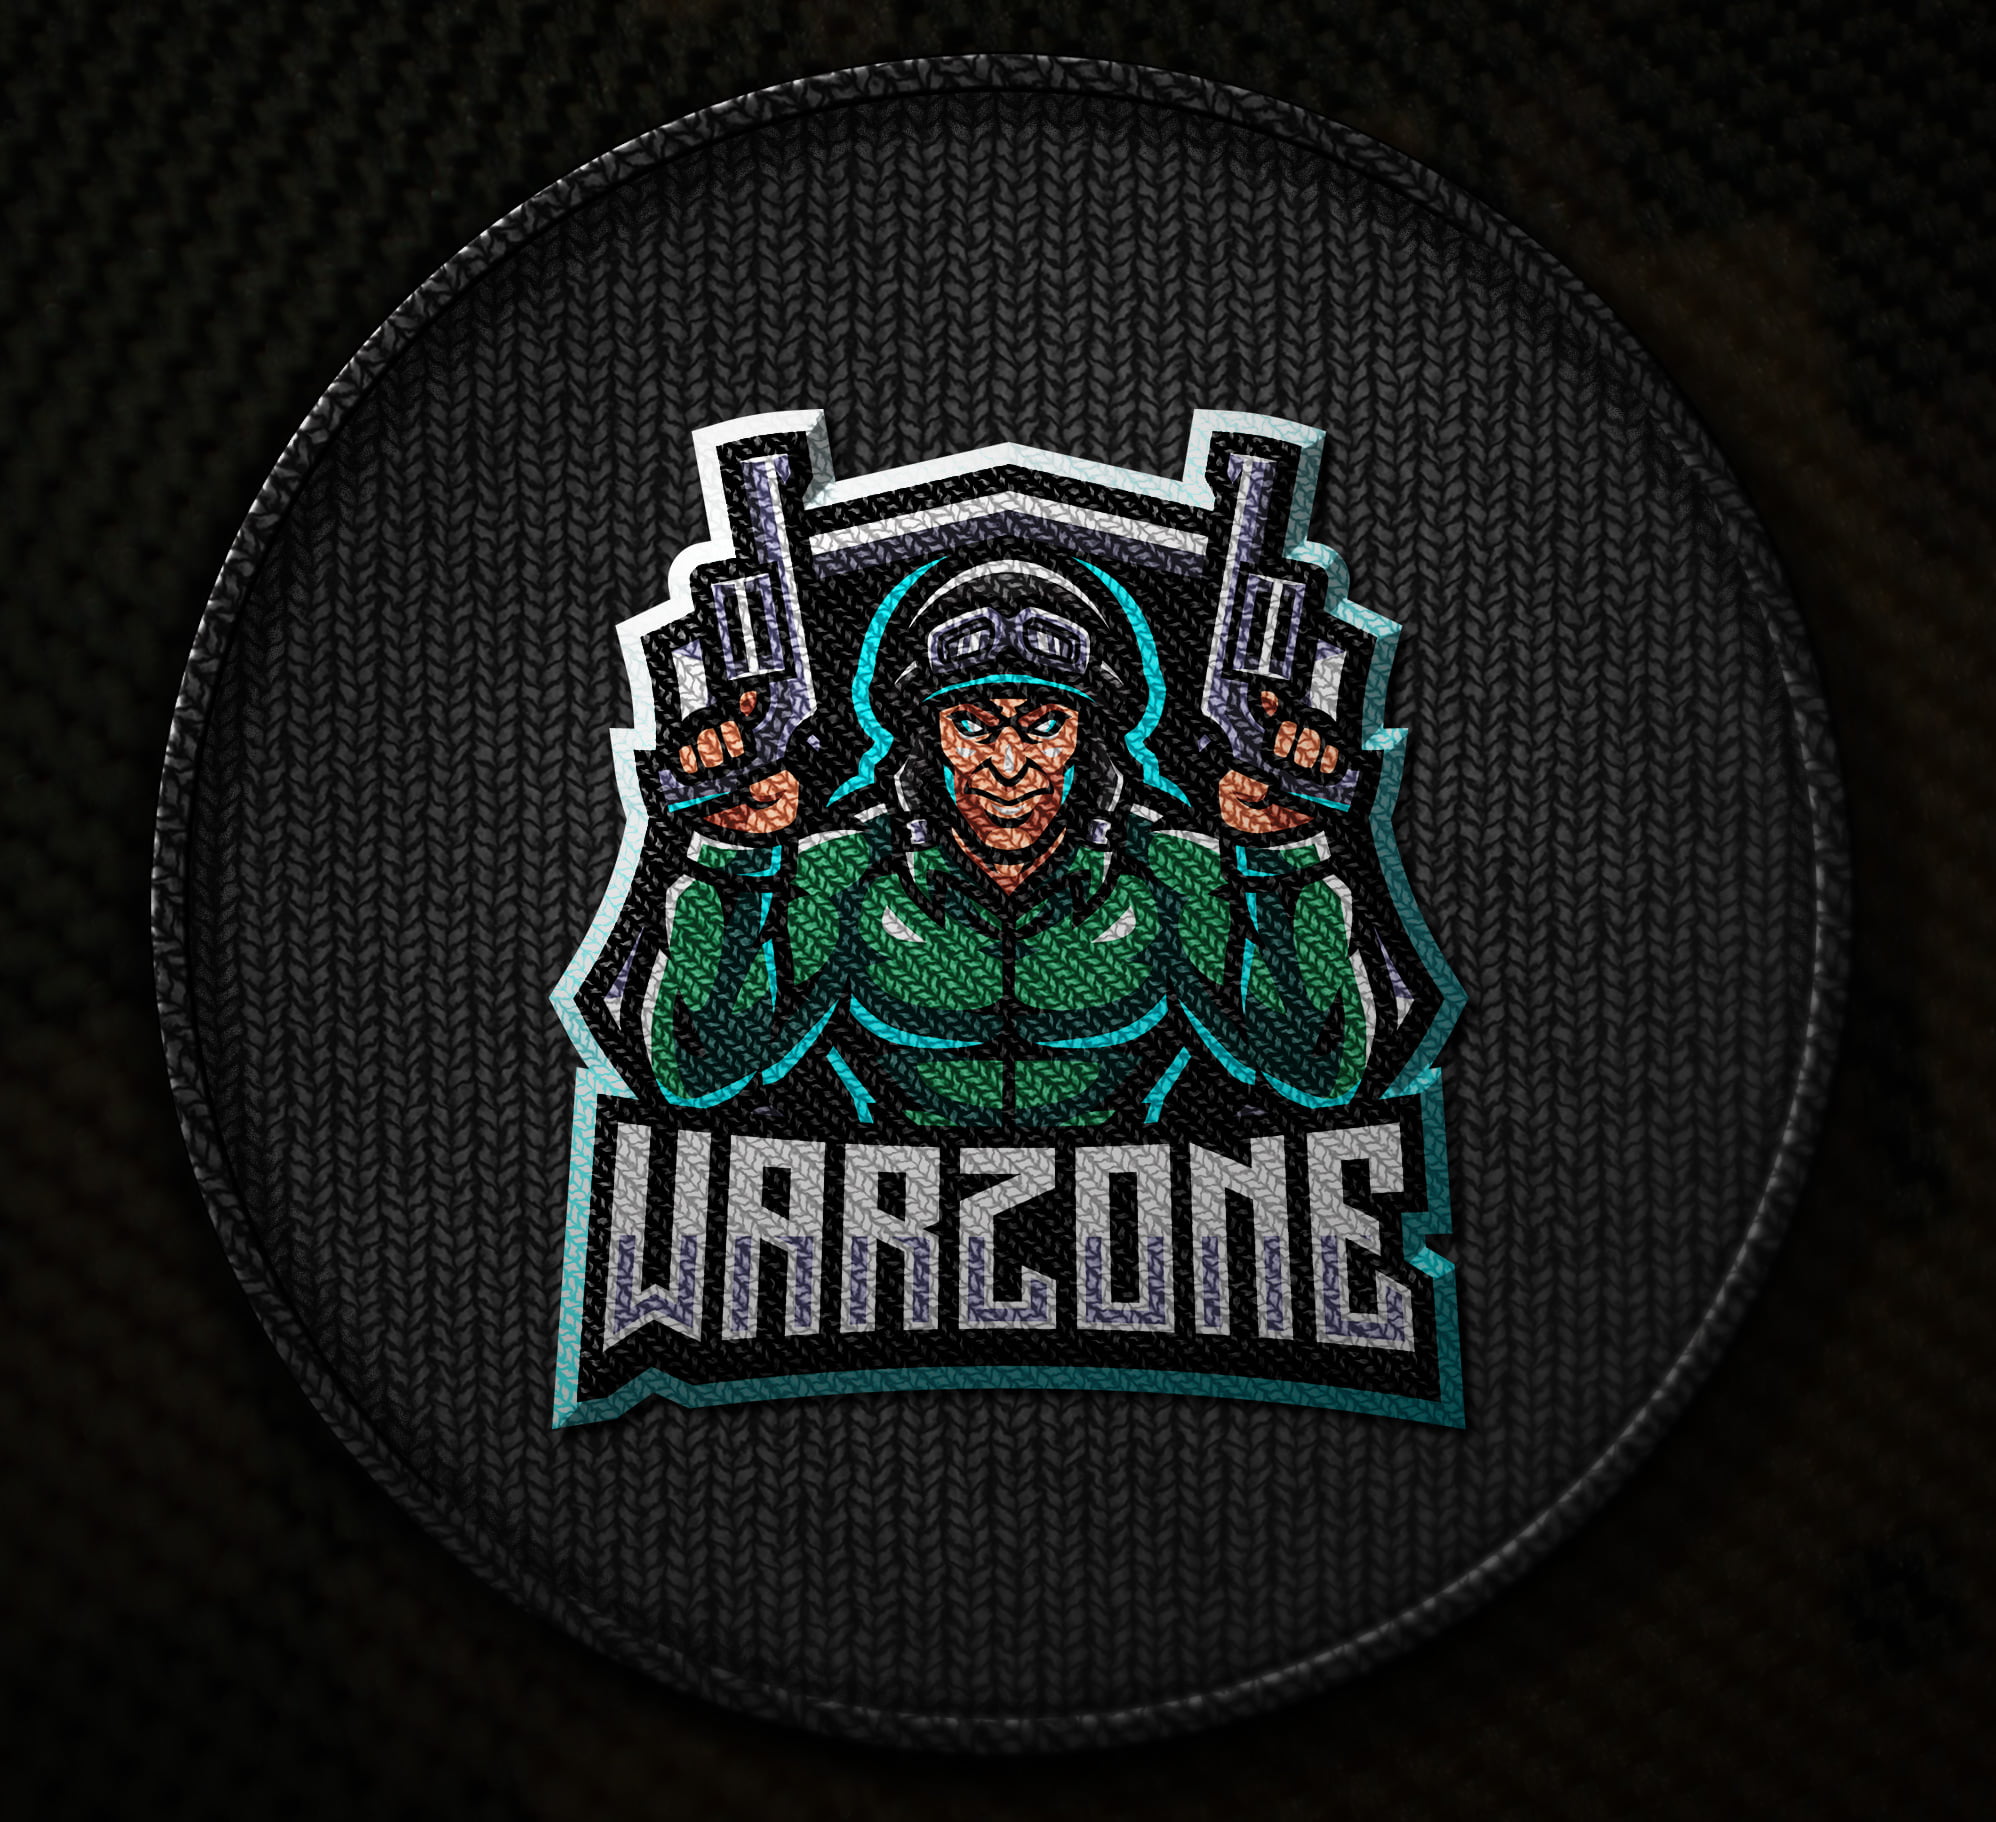 Logo for Call of Duty: Warzone 2.0 by aeetheerr